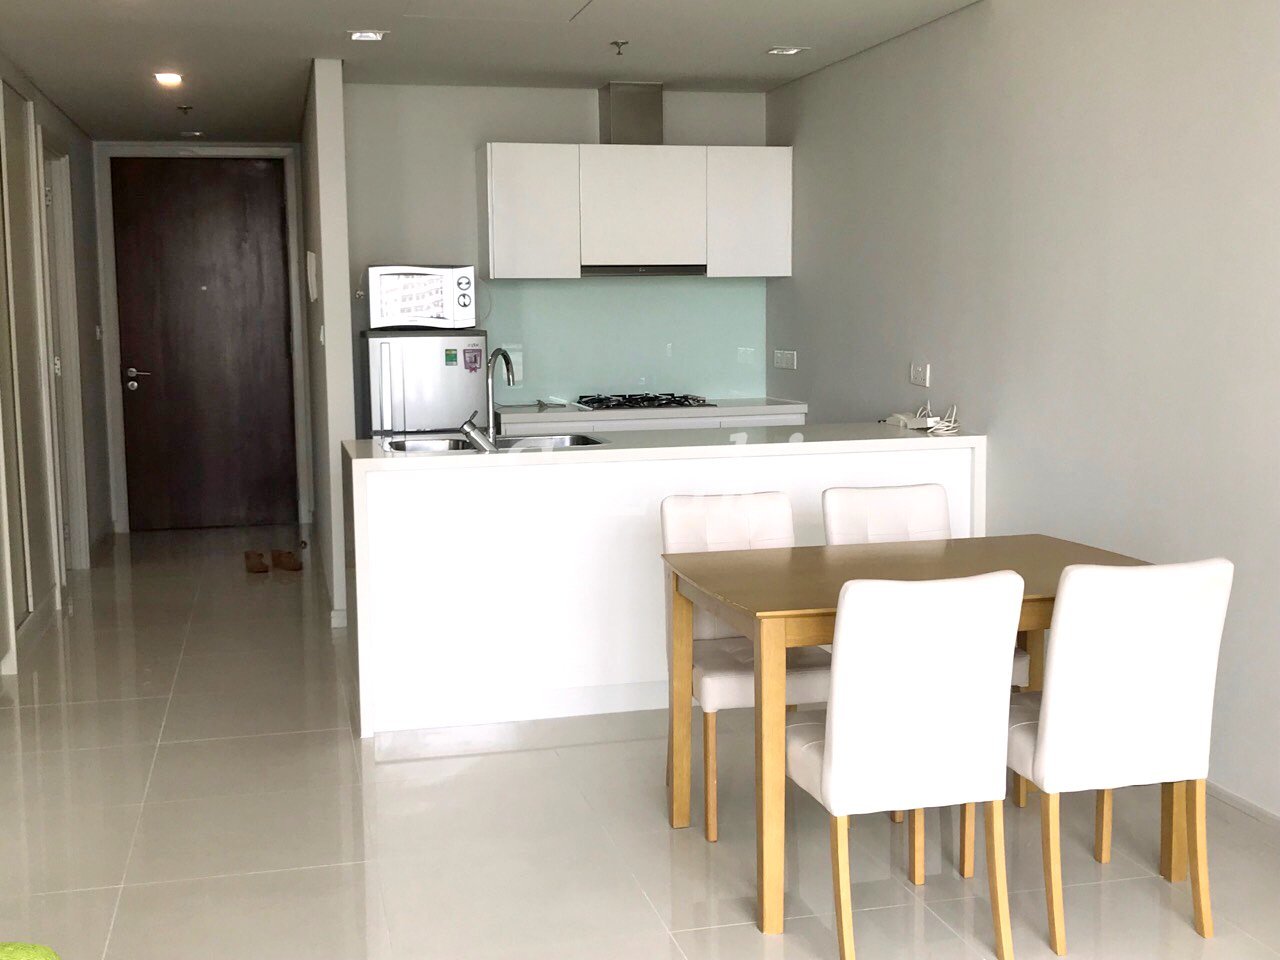 City Garden, which is popular with Japanese people because it allows pets, rental real estate in Ho Chi Minh City – ST102184